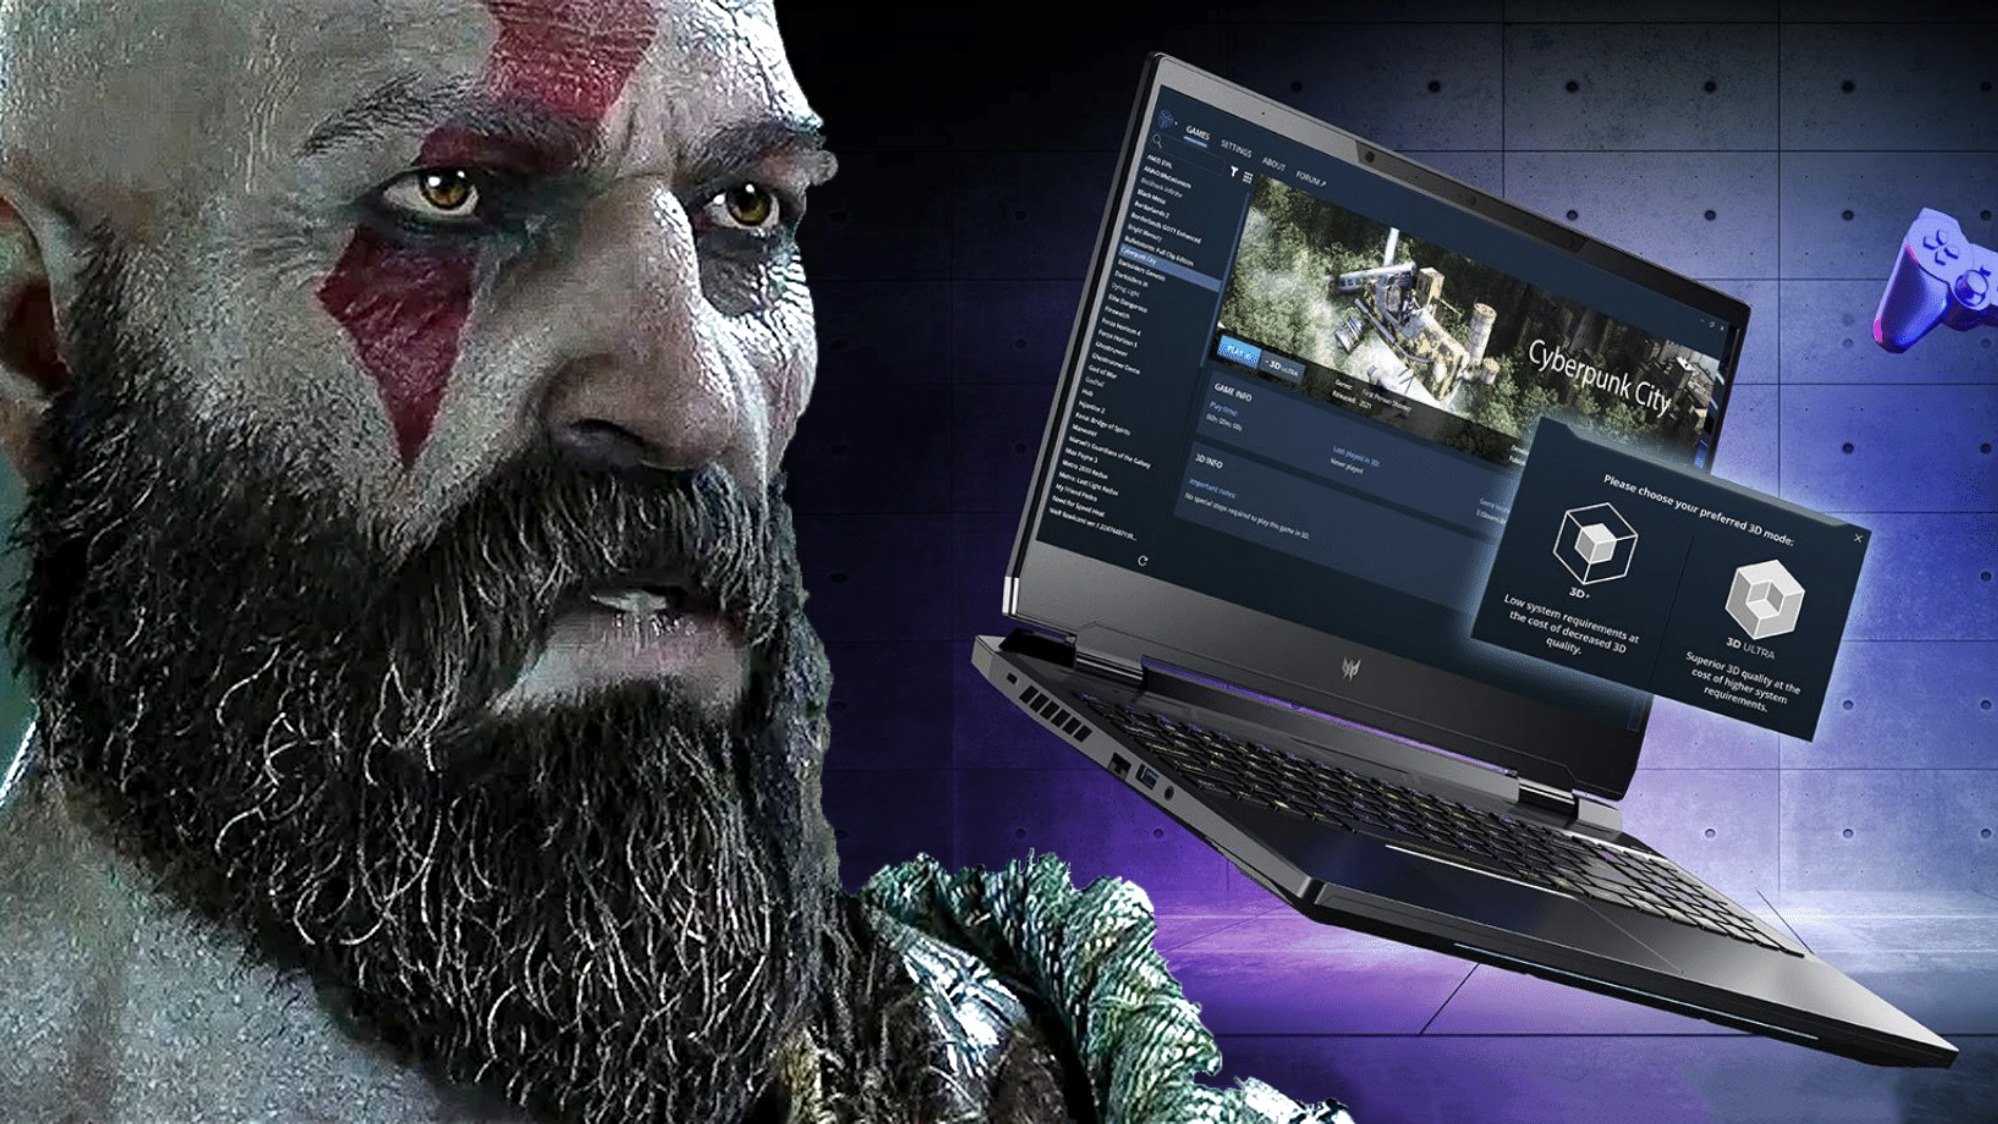 God of War PC requirements and features: These are the best gaming laptops  for GoW